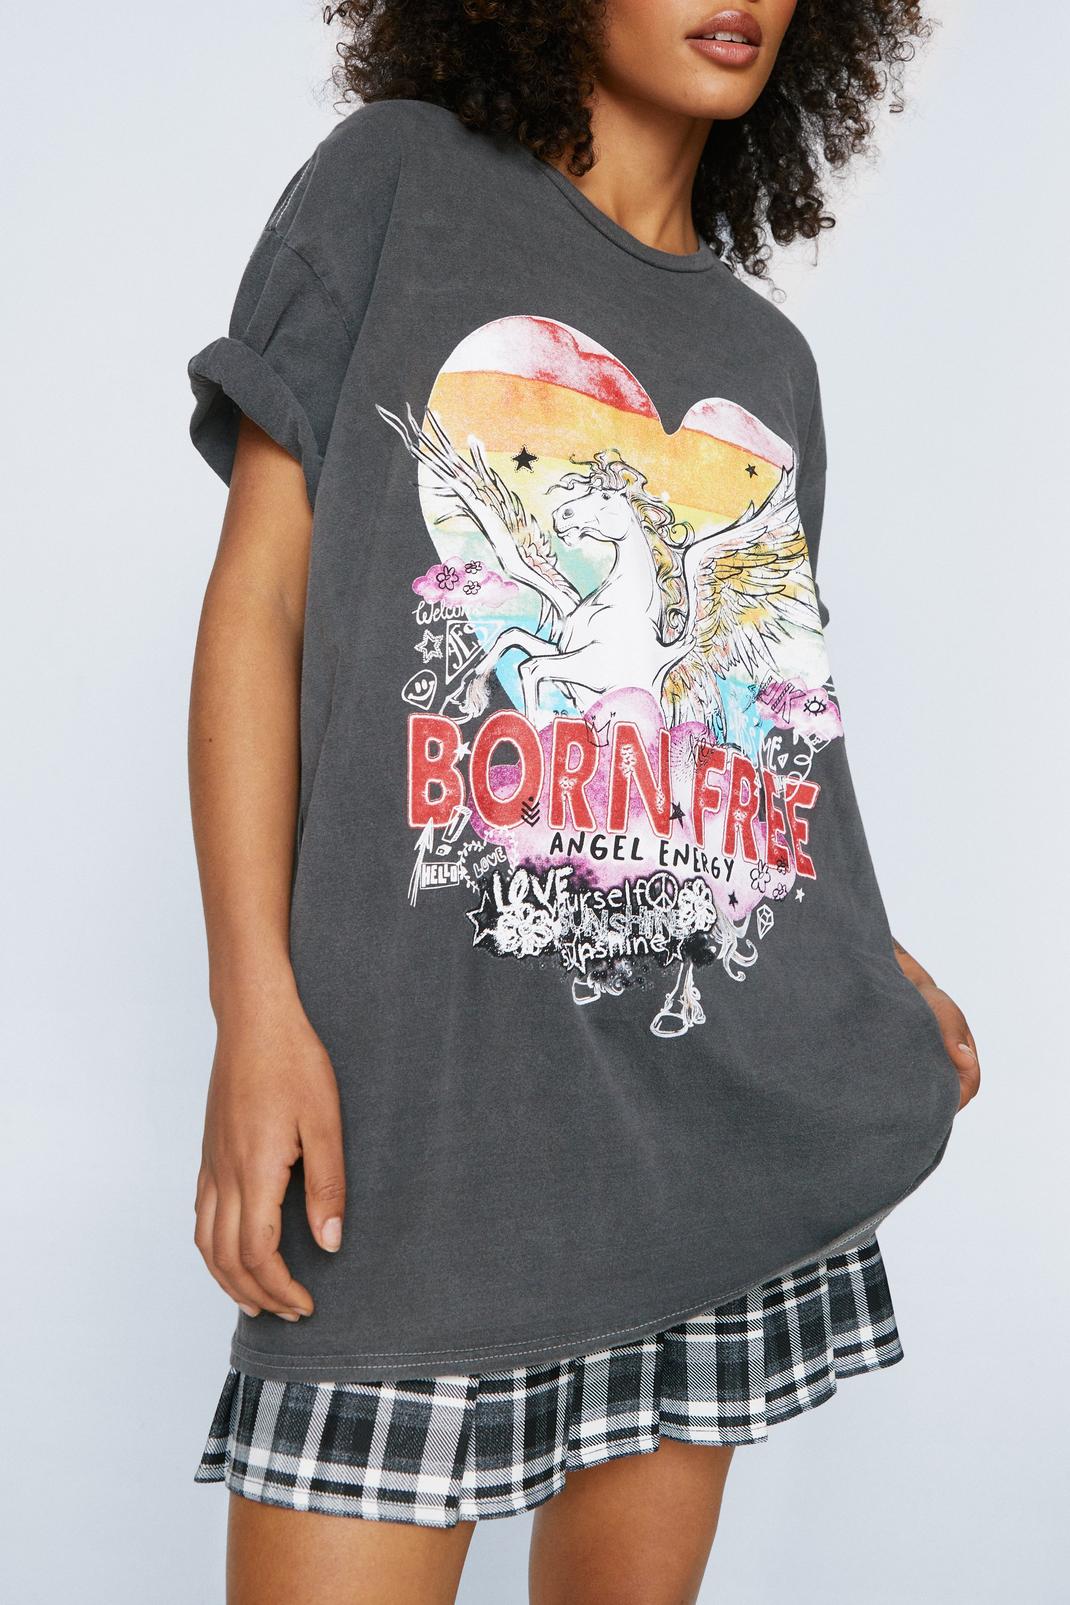 Born To Be - Oversized T-Shirt for Women